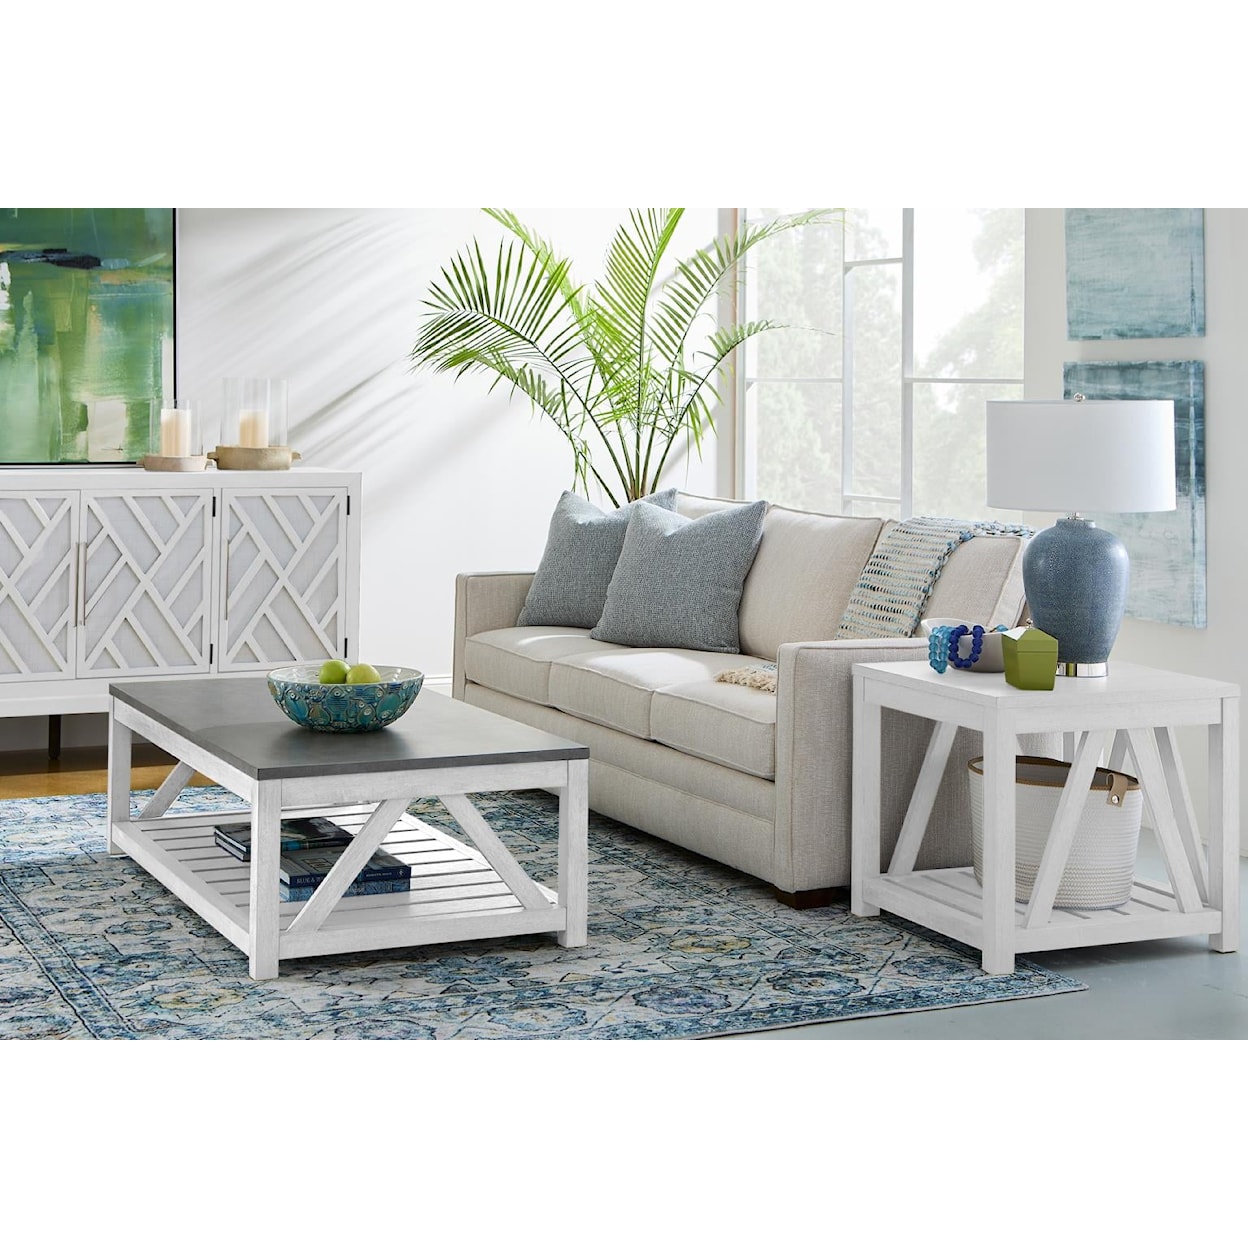 Trisha Yearwood Home Collection by Legacy Classic Staycation Entertainment Console